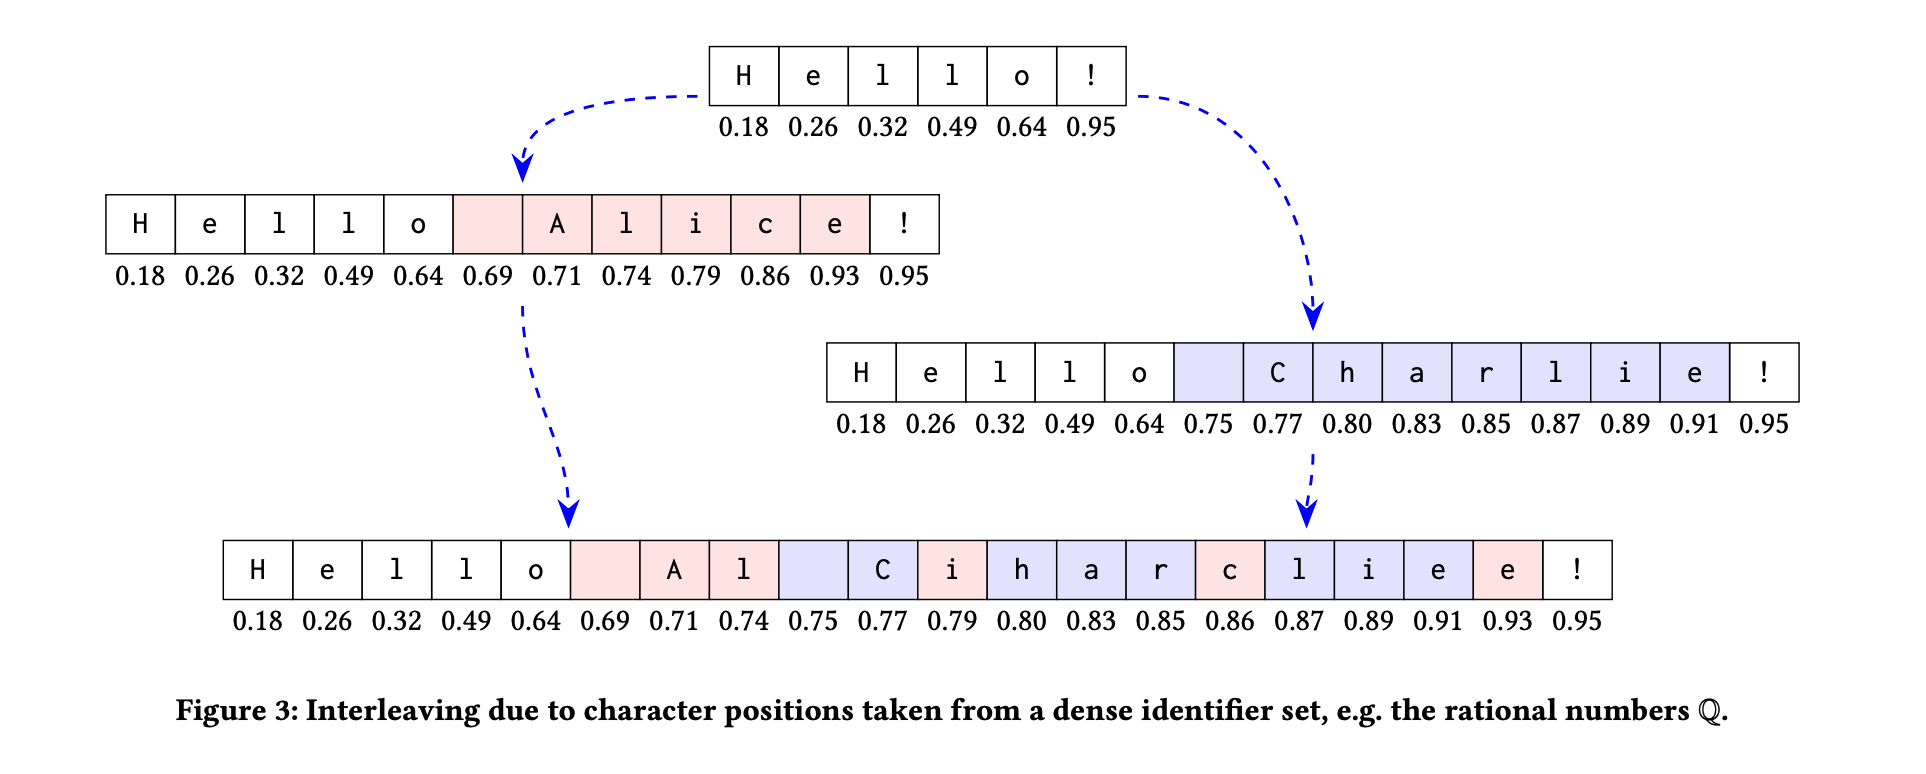 An example of an interleaving anomaly when using fractional indexing CRDT on text content. Source: **Martin Kleppmann, Victor B. F. Gomes, Dominic P. Mulligan, and Alastair R. Beresford. 2019. Interleaving anomalies in collaborative text editors. https://doi.org/10.1145/3301419.3323972